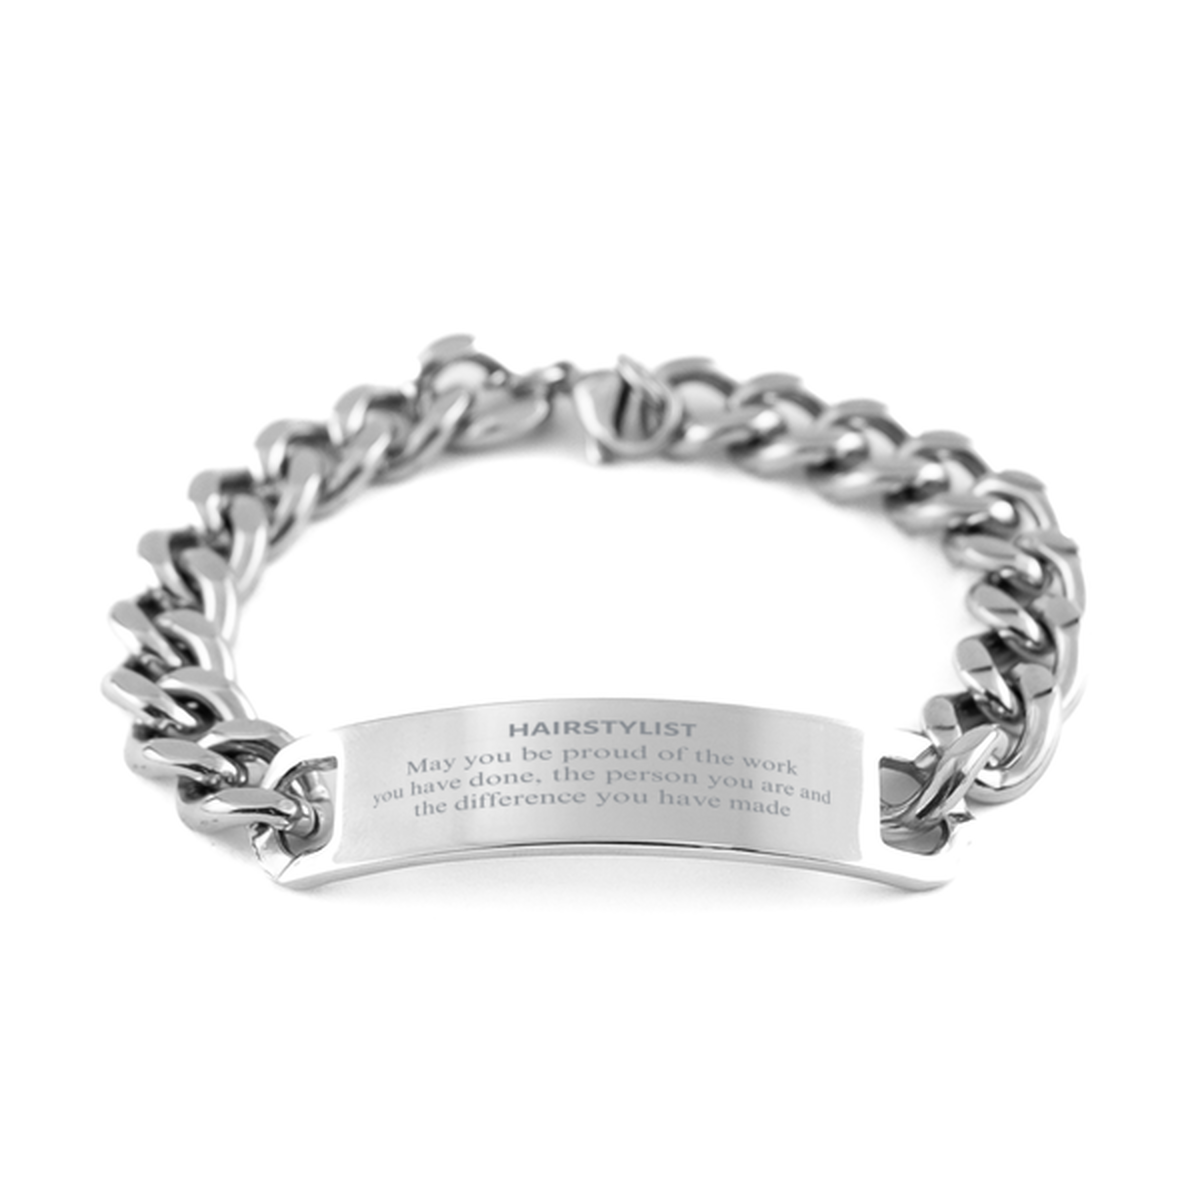 Hairstylist May you be proud of the work you have done, Retirement Hairstylist Cuban Chain Stainless Steel Bracelet for Colleague Appreciation Gifts Amazing for Hairstylist